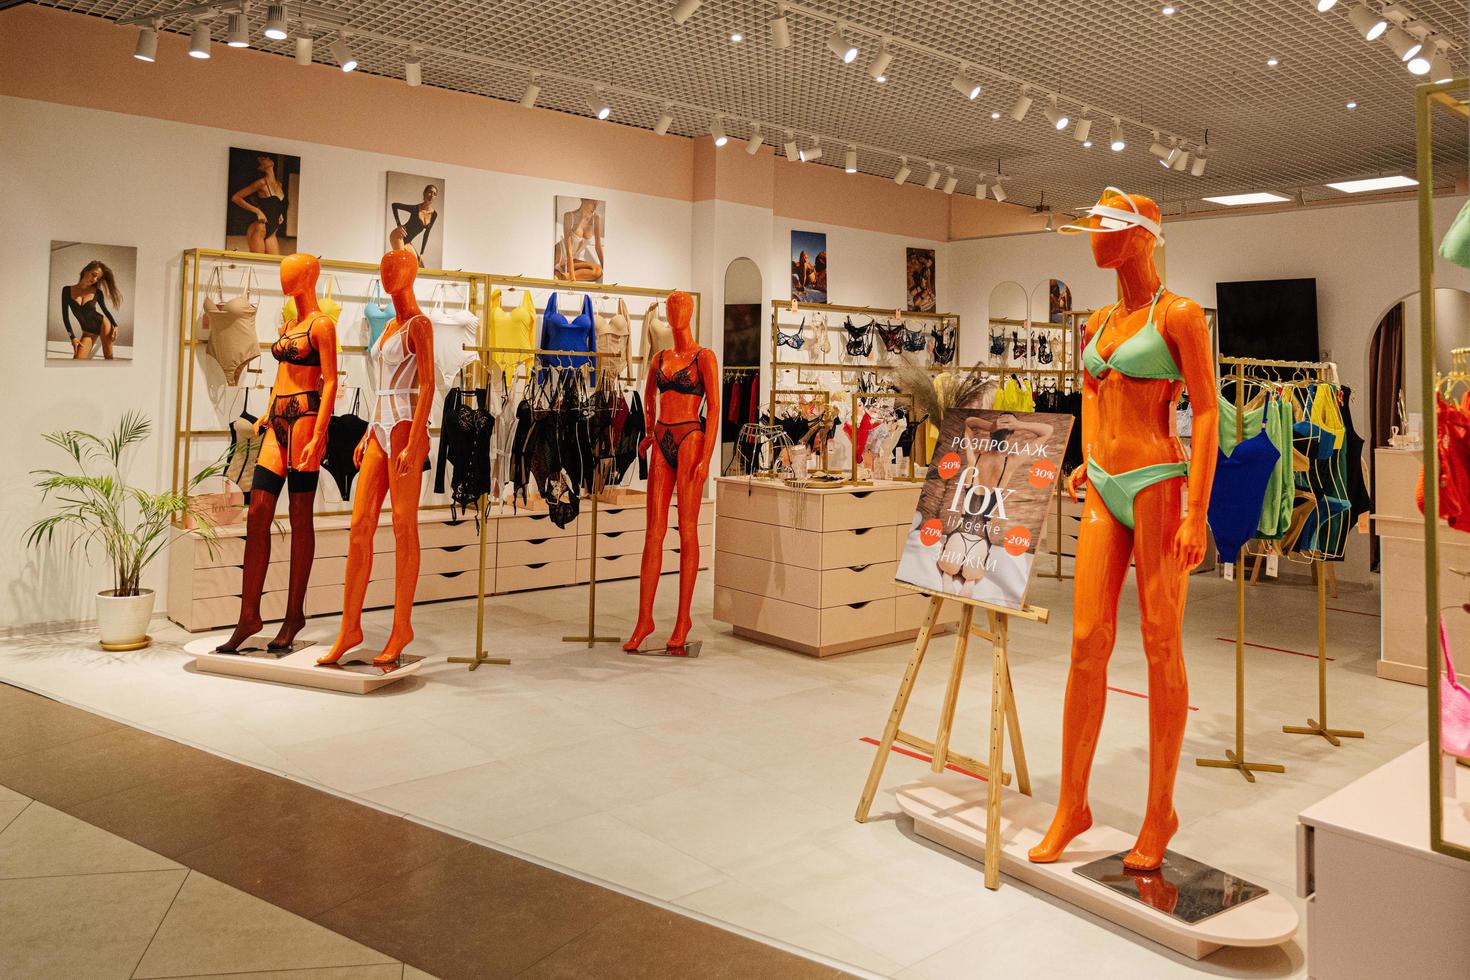 https://static.vecteezy.com/system/resources/previews/014/185/594/non_2x/orange-female-mannequins-in-underwear-lingerie-store-lace-bra-and-panties-in-a-shop-free-photo.jpg